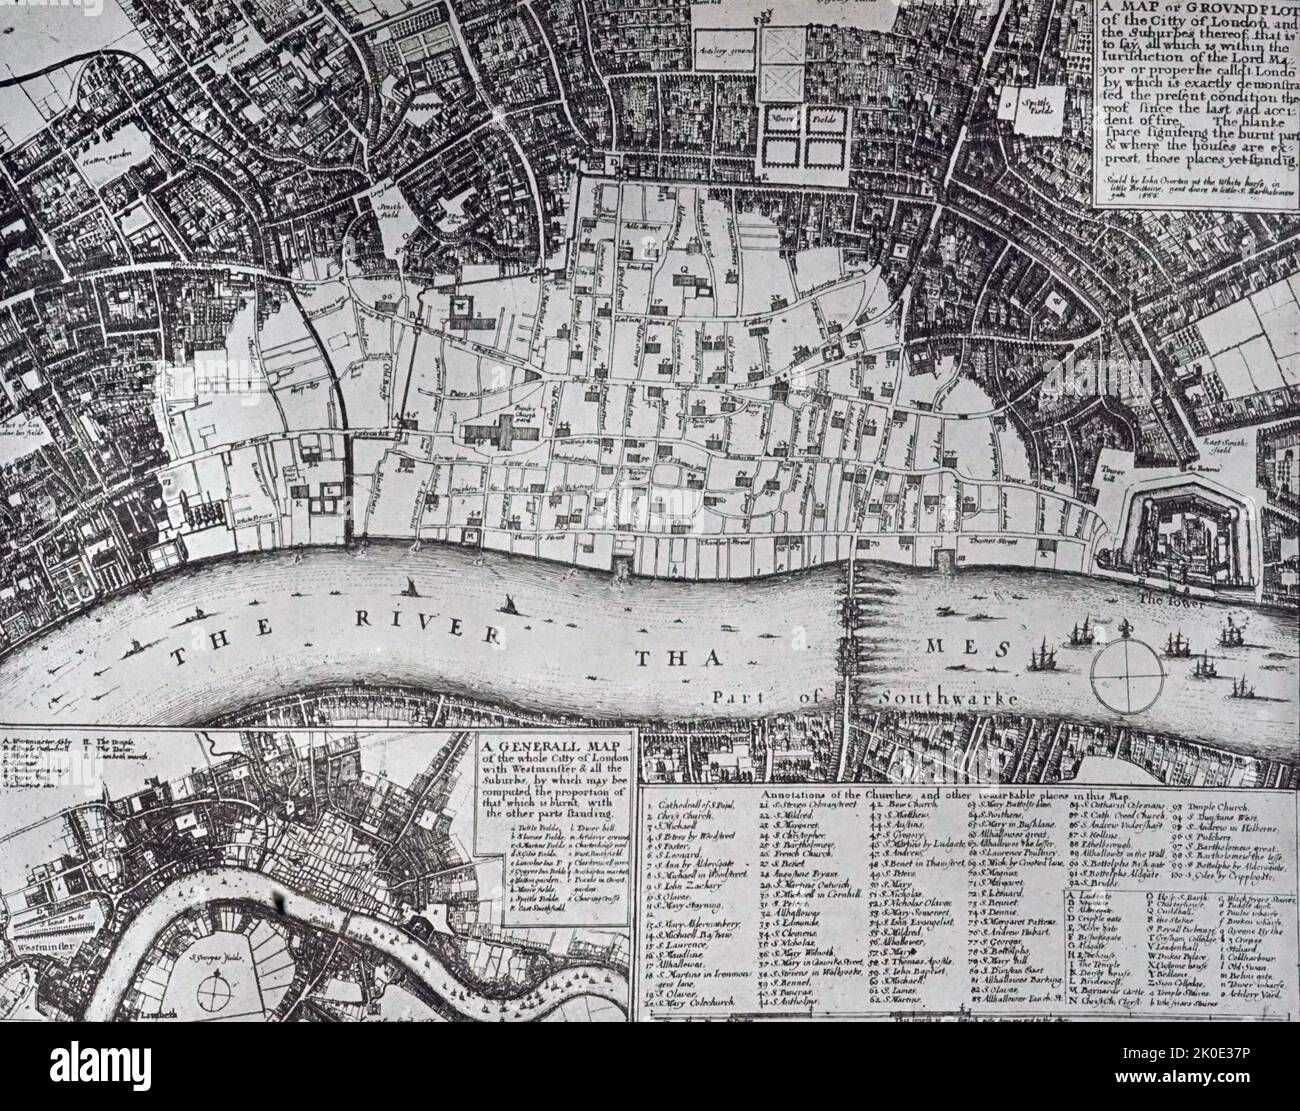 Hollars map of London, 1666, showing the area devasted by the Great Fire of London. Stock Photo